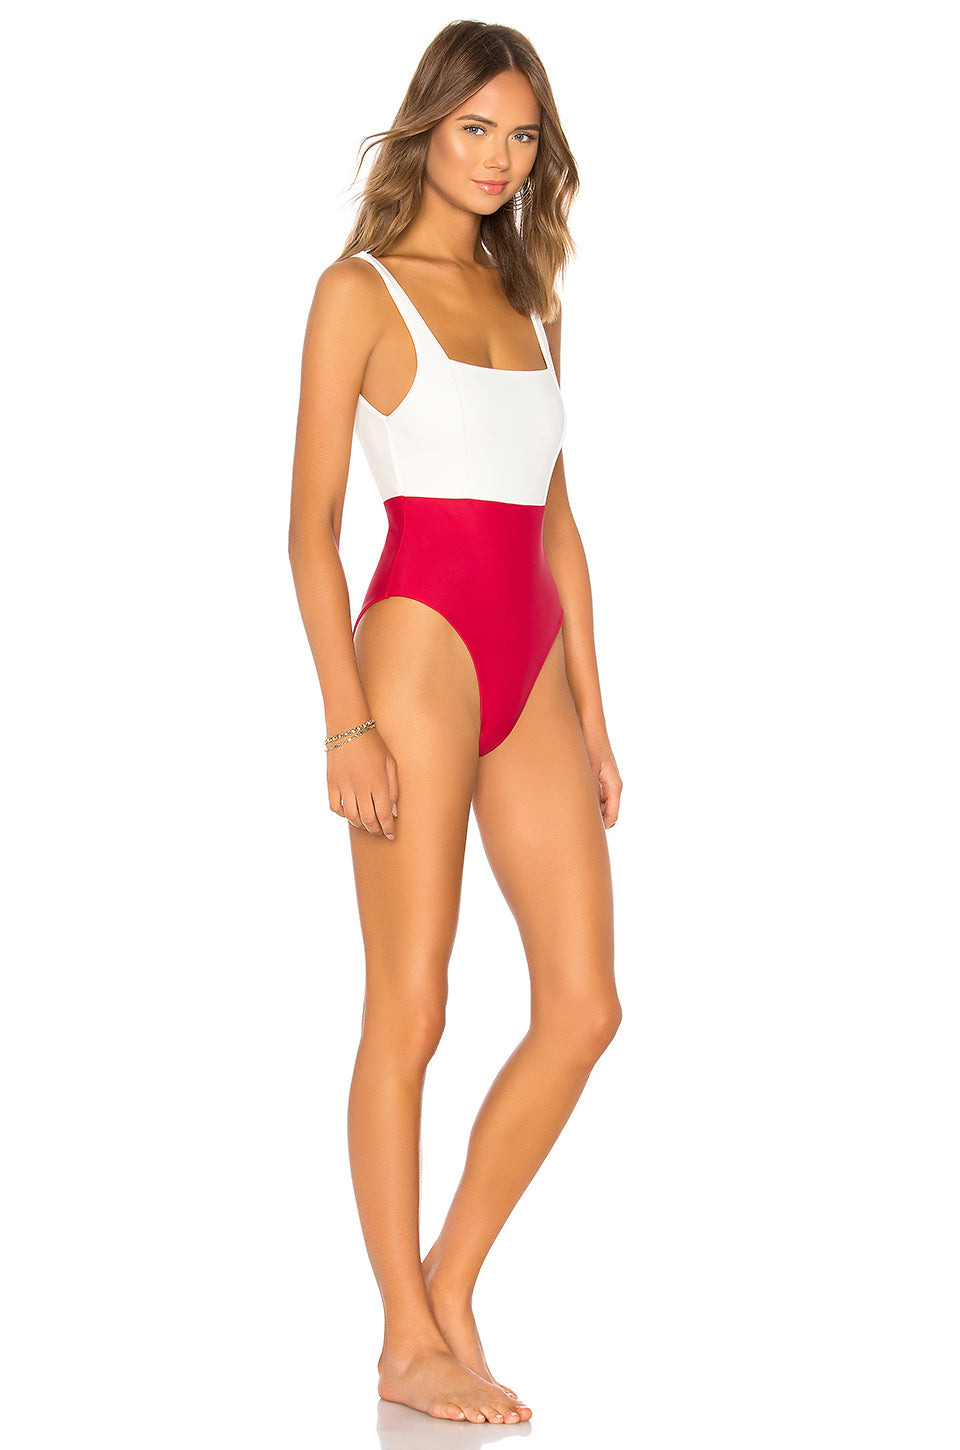 Mack One Piece in RICH RED AND IVORY